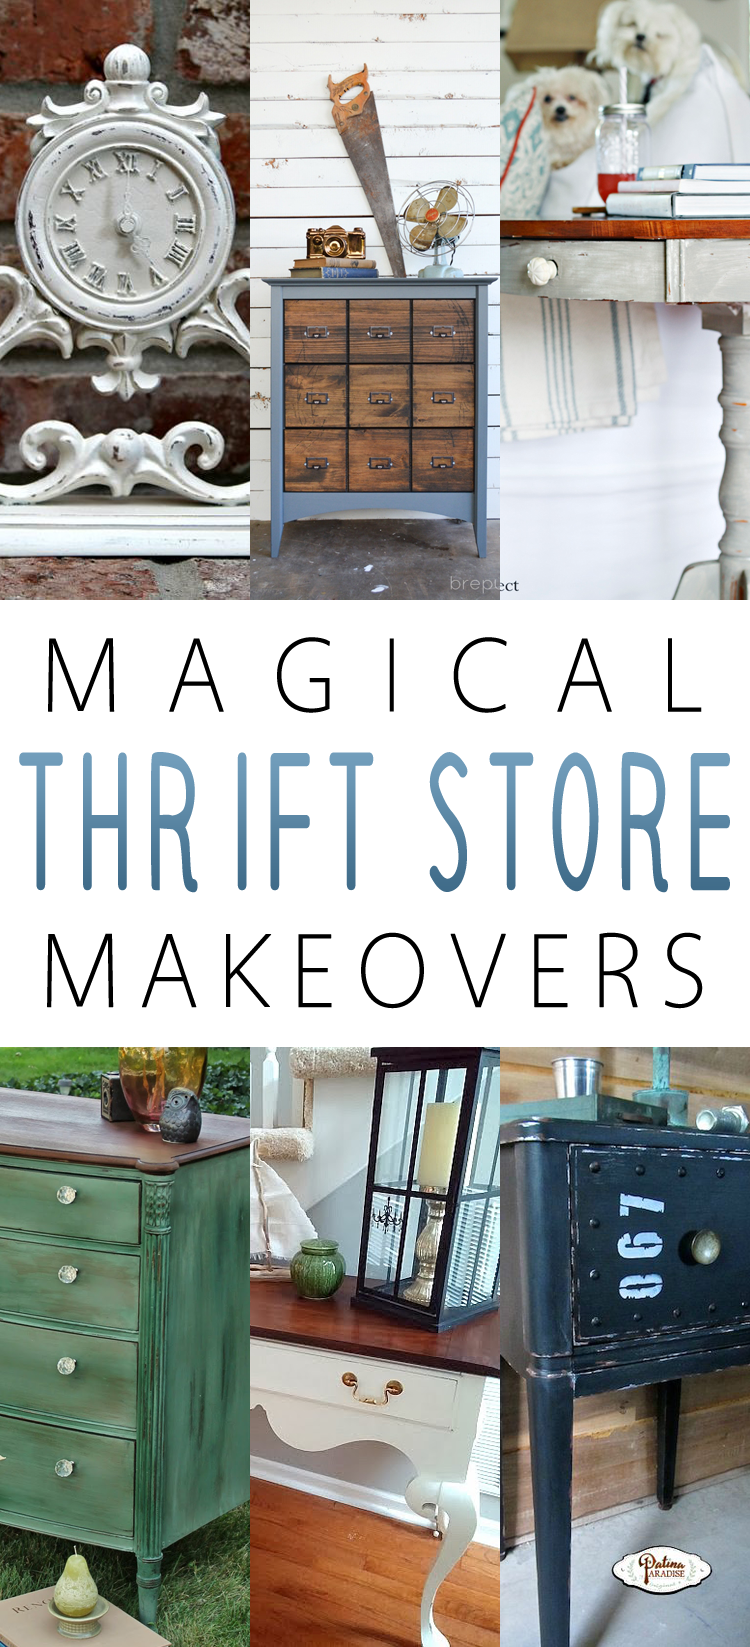 http://thecottagemarket.com/wp-content/uploads/2015/08/Makeover-TOWERR-123456.png